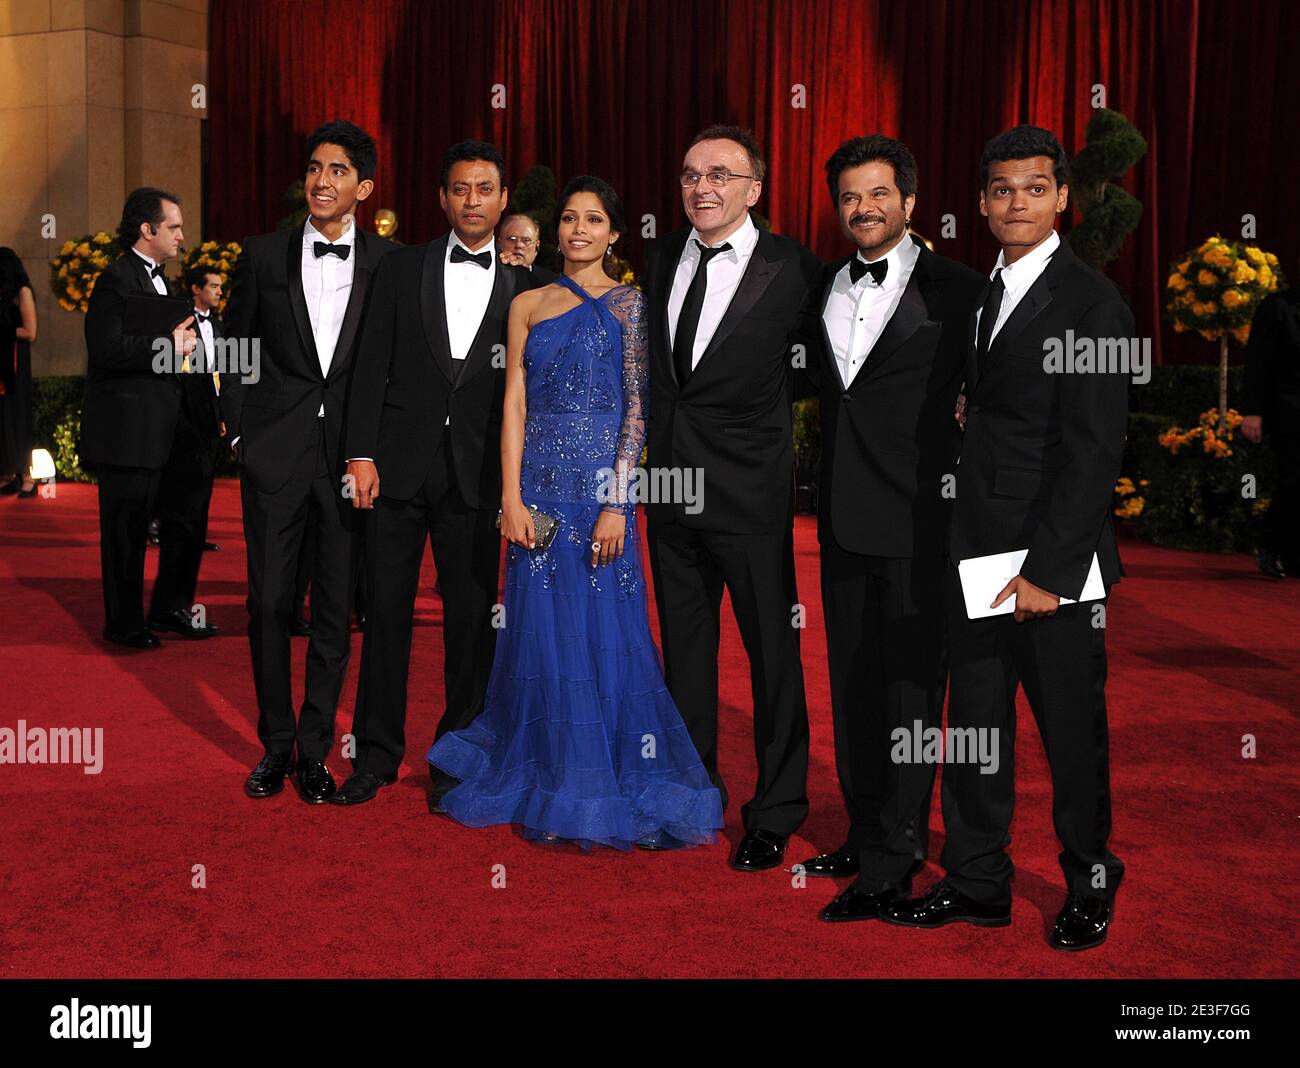 (left to right) Dev Patel, Irrfan Khan, Freida Pinto, Danny Boyle, Anil Kapoor and Madhur Mittal arriving at the 81st Academy Awards ceremony, held at the Kodak Theater in Los Angeles, CA, USA on February 22, 2009. Photo by Lionel Hahn/ABACAPRESS.COM (Pictured : Dev Patel, Irrfan Khan, Freida Pinto, Danny Boyle, Anil Kapoor, Madhur Mittal) Stock Photo